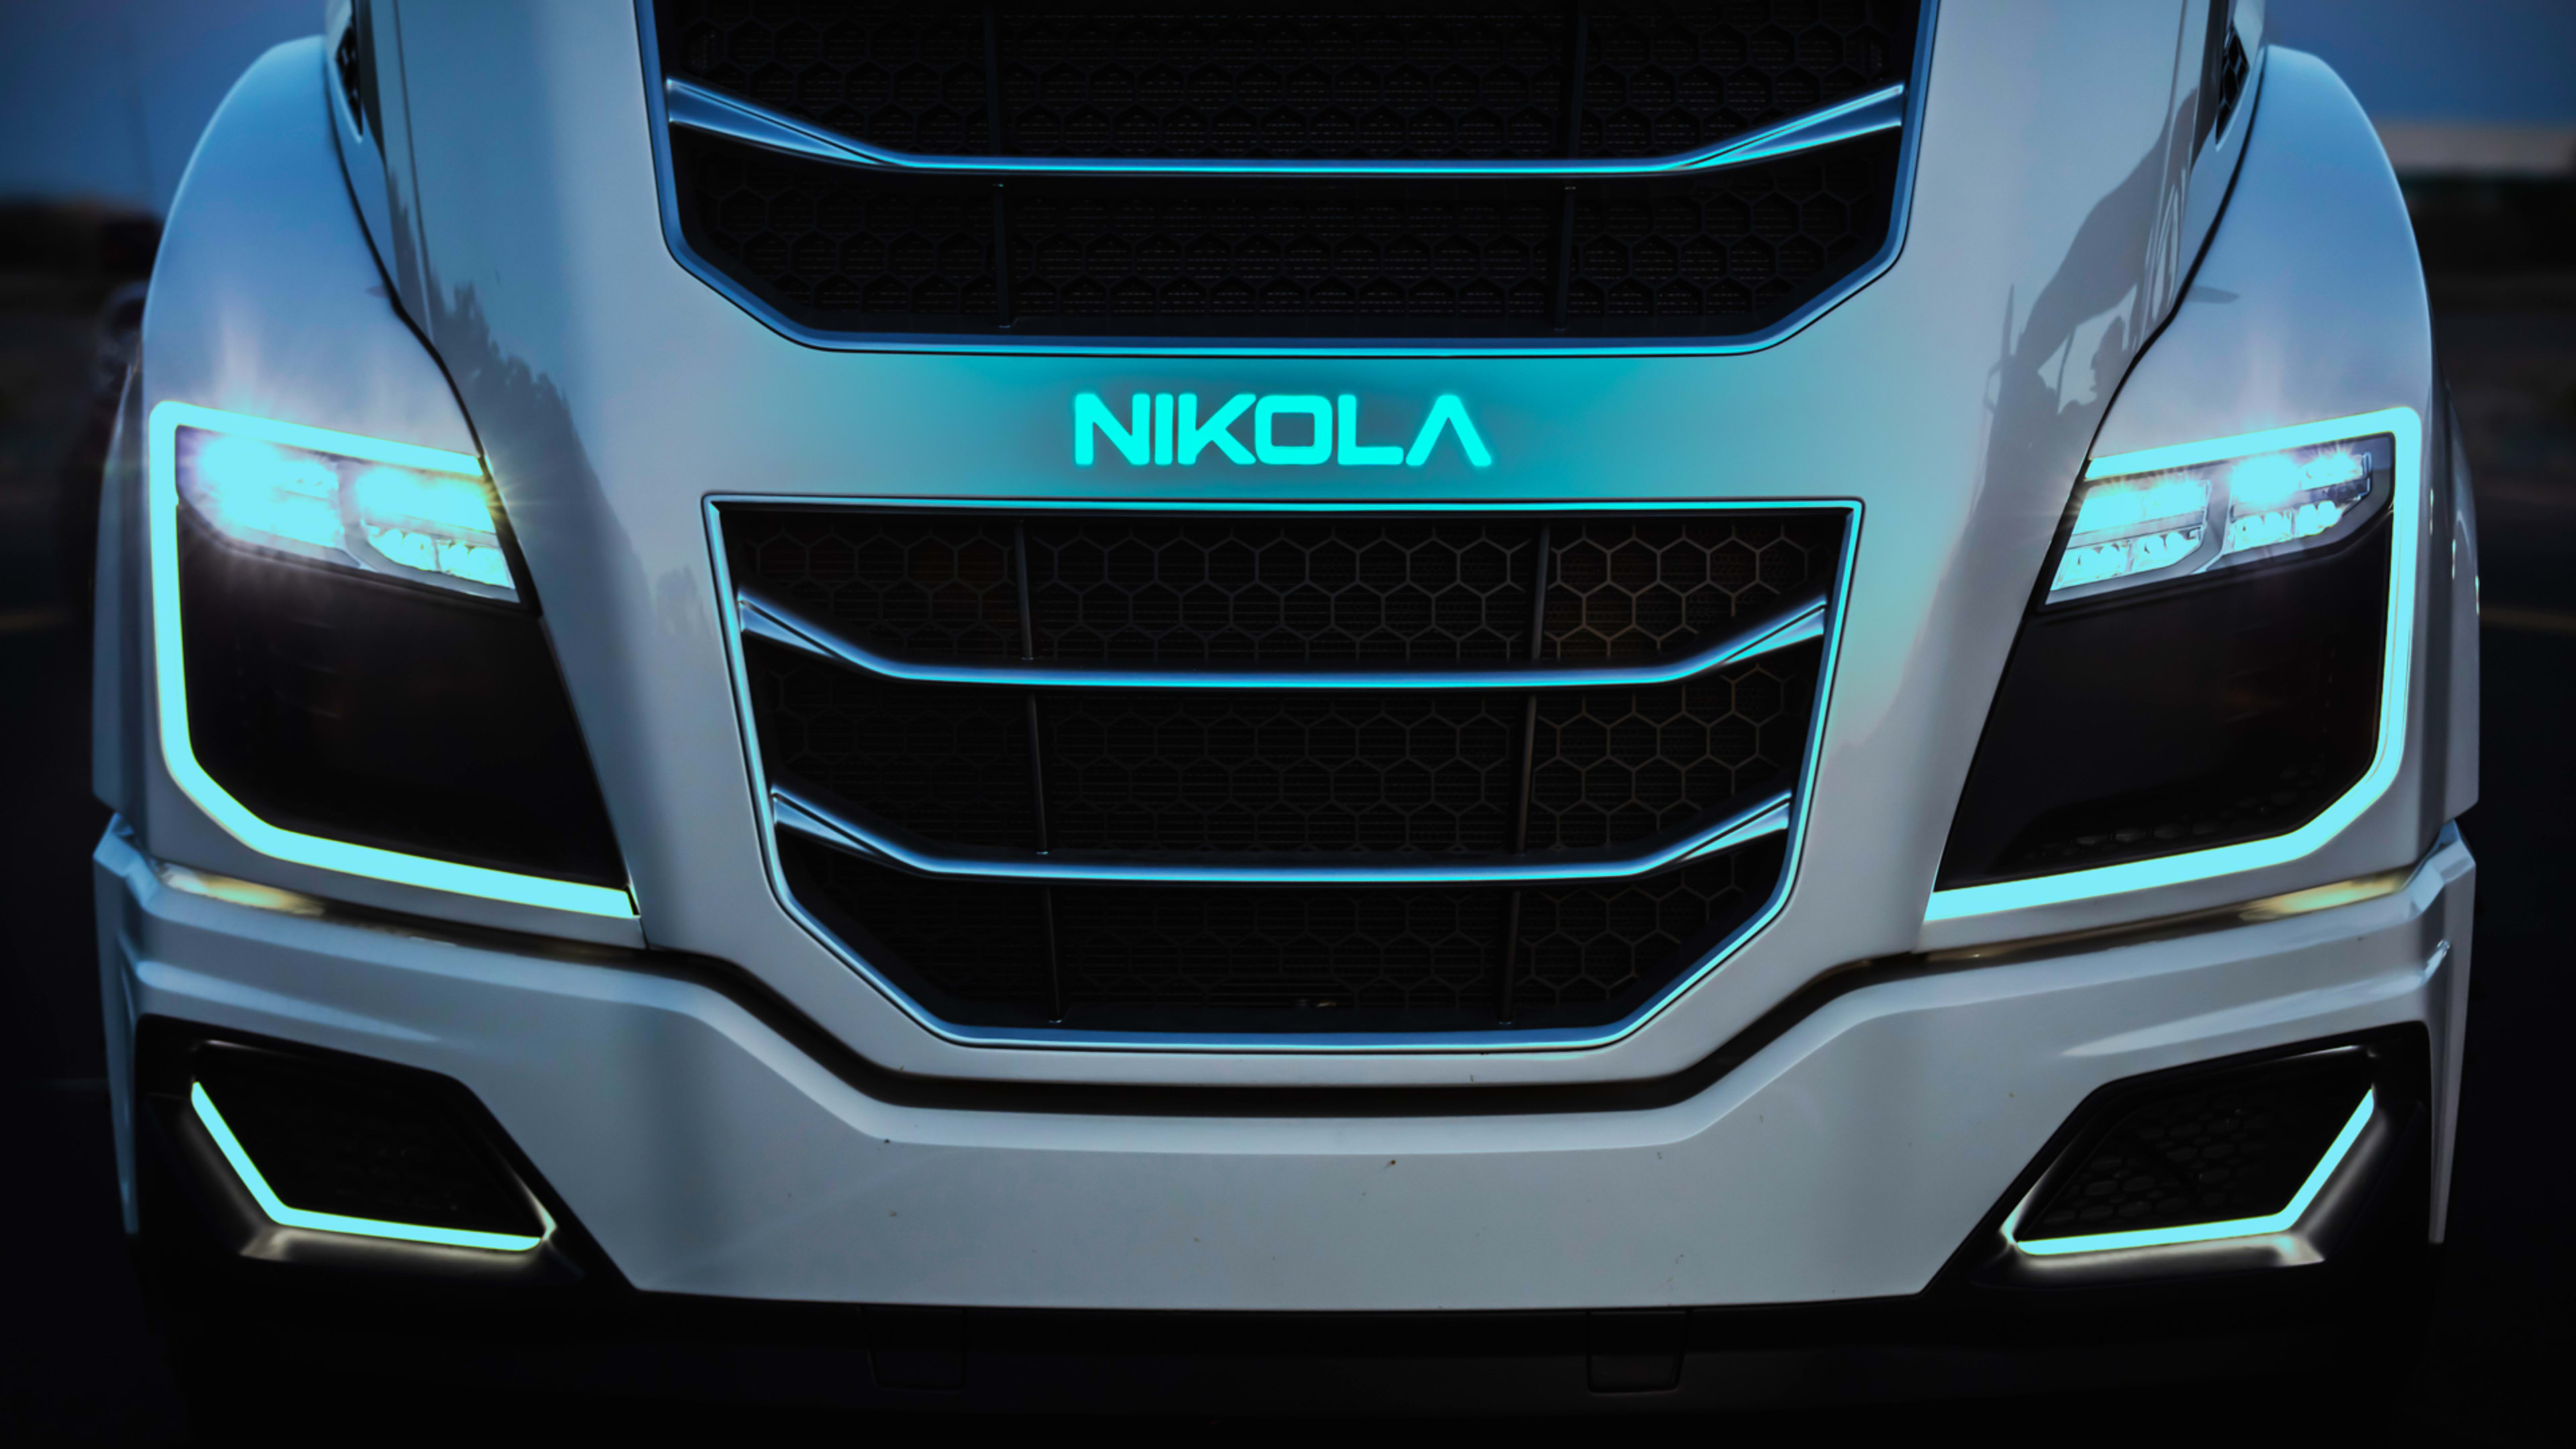 Nikola gets dirty with a fleet of electric garbage trucks planned for 2023